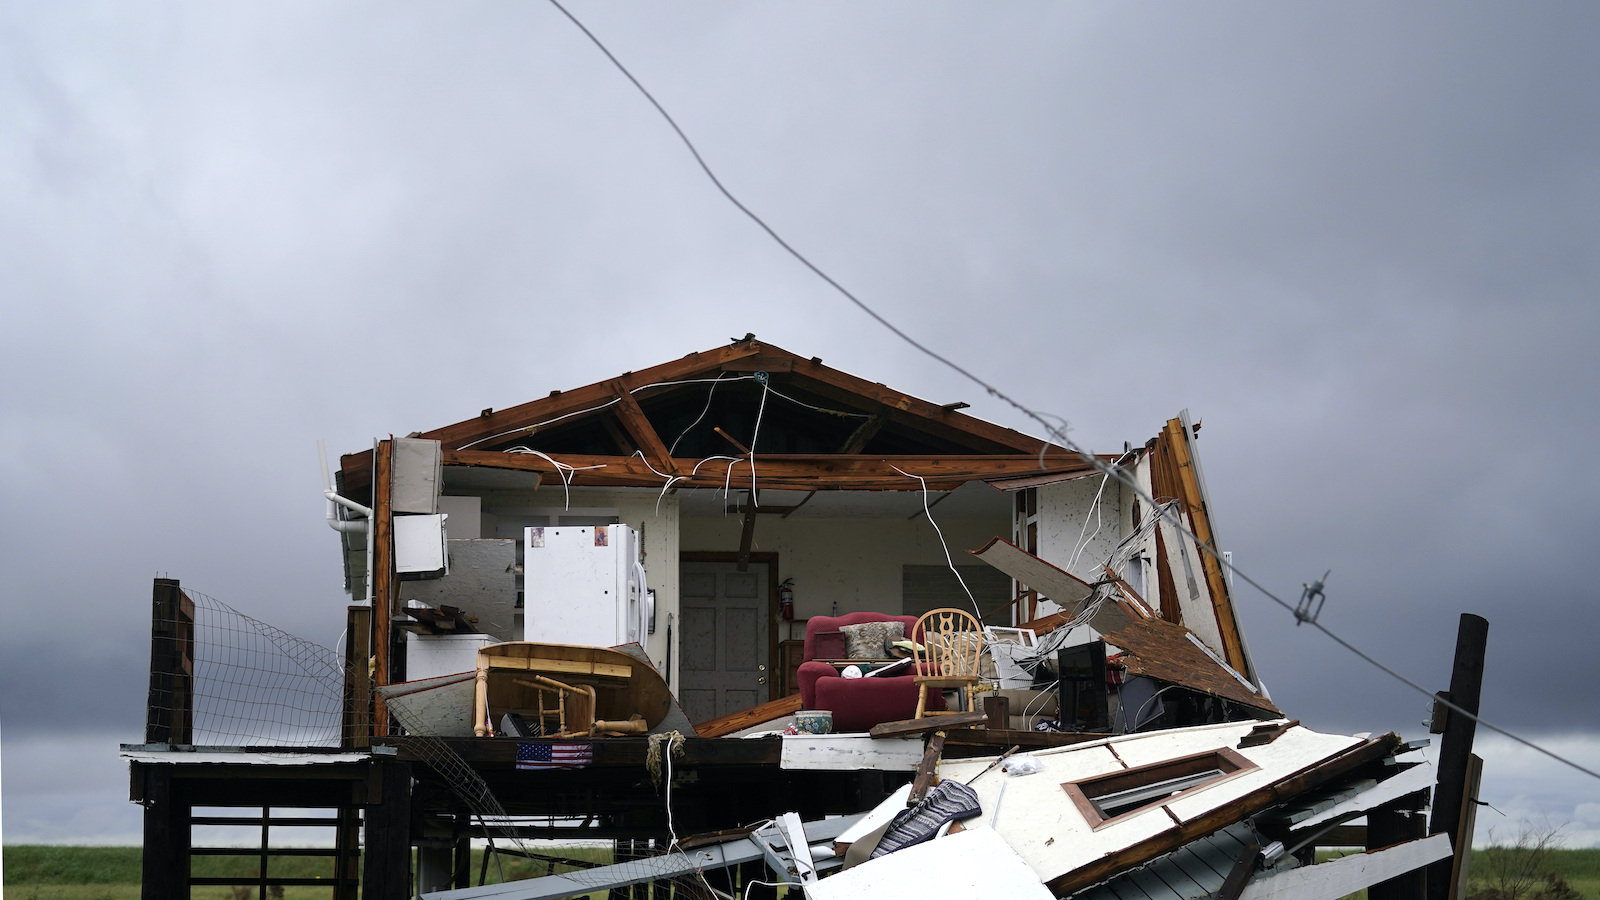 Storm clouds gather behind a home that was destroyed by Hurricane Ida, in Pointe-aux-Chenes, Louisiana.